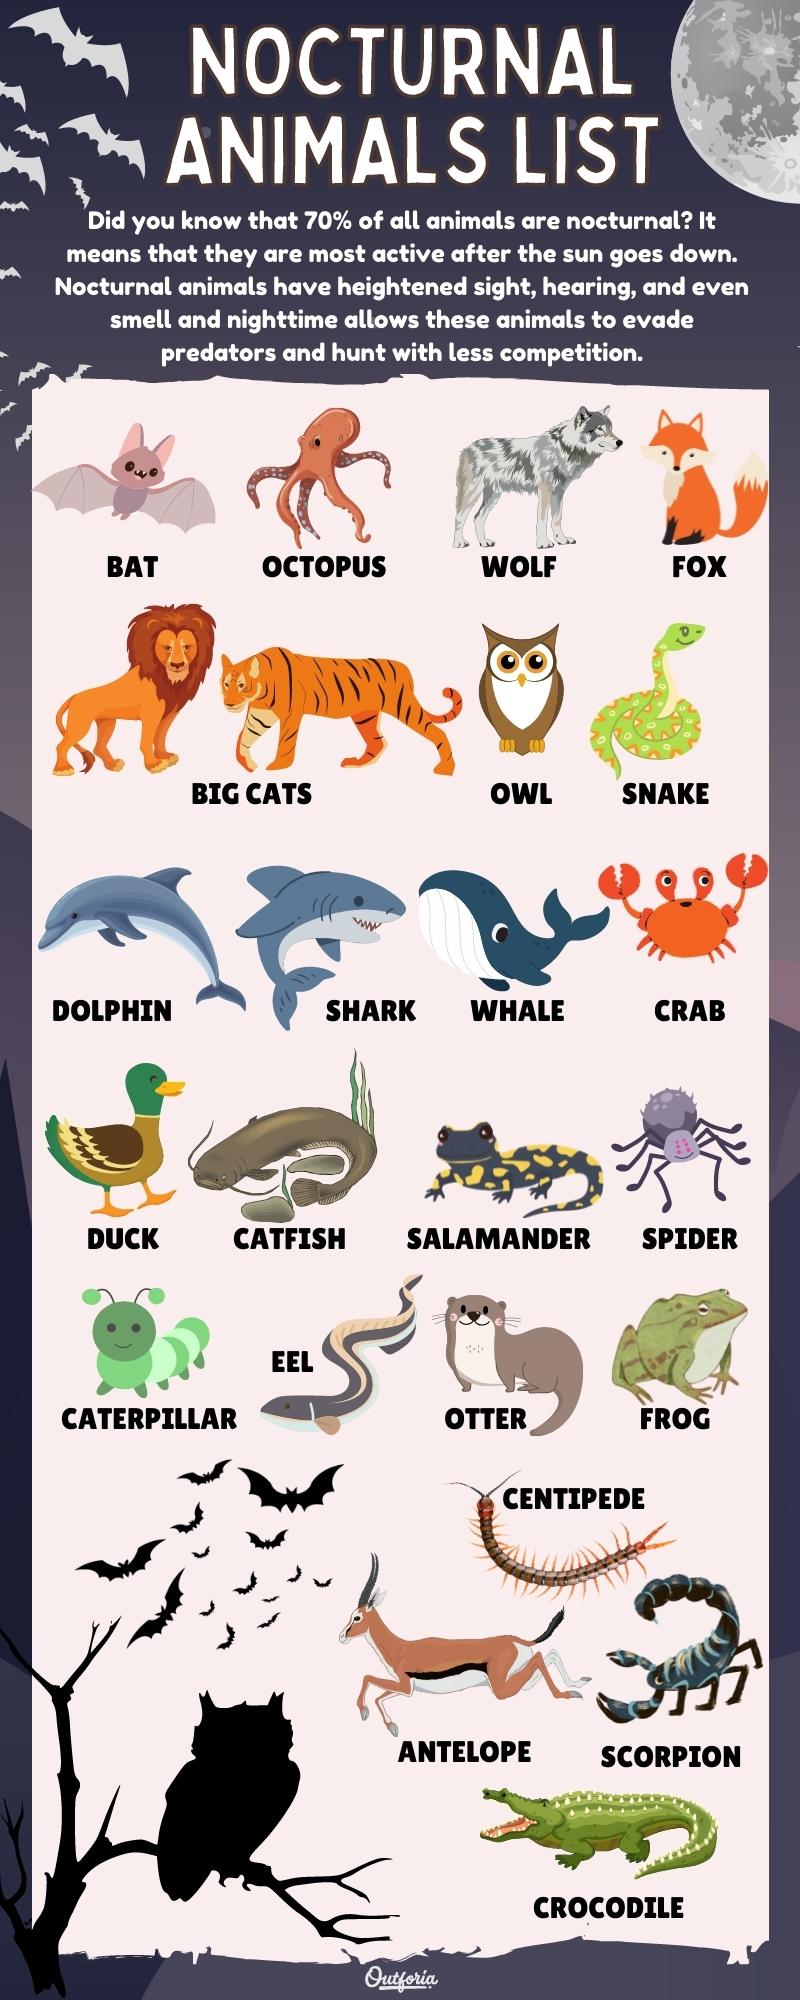 chart of images, names, and illustrations of nocturnal animals list